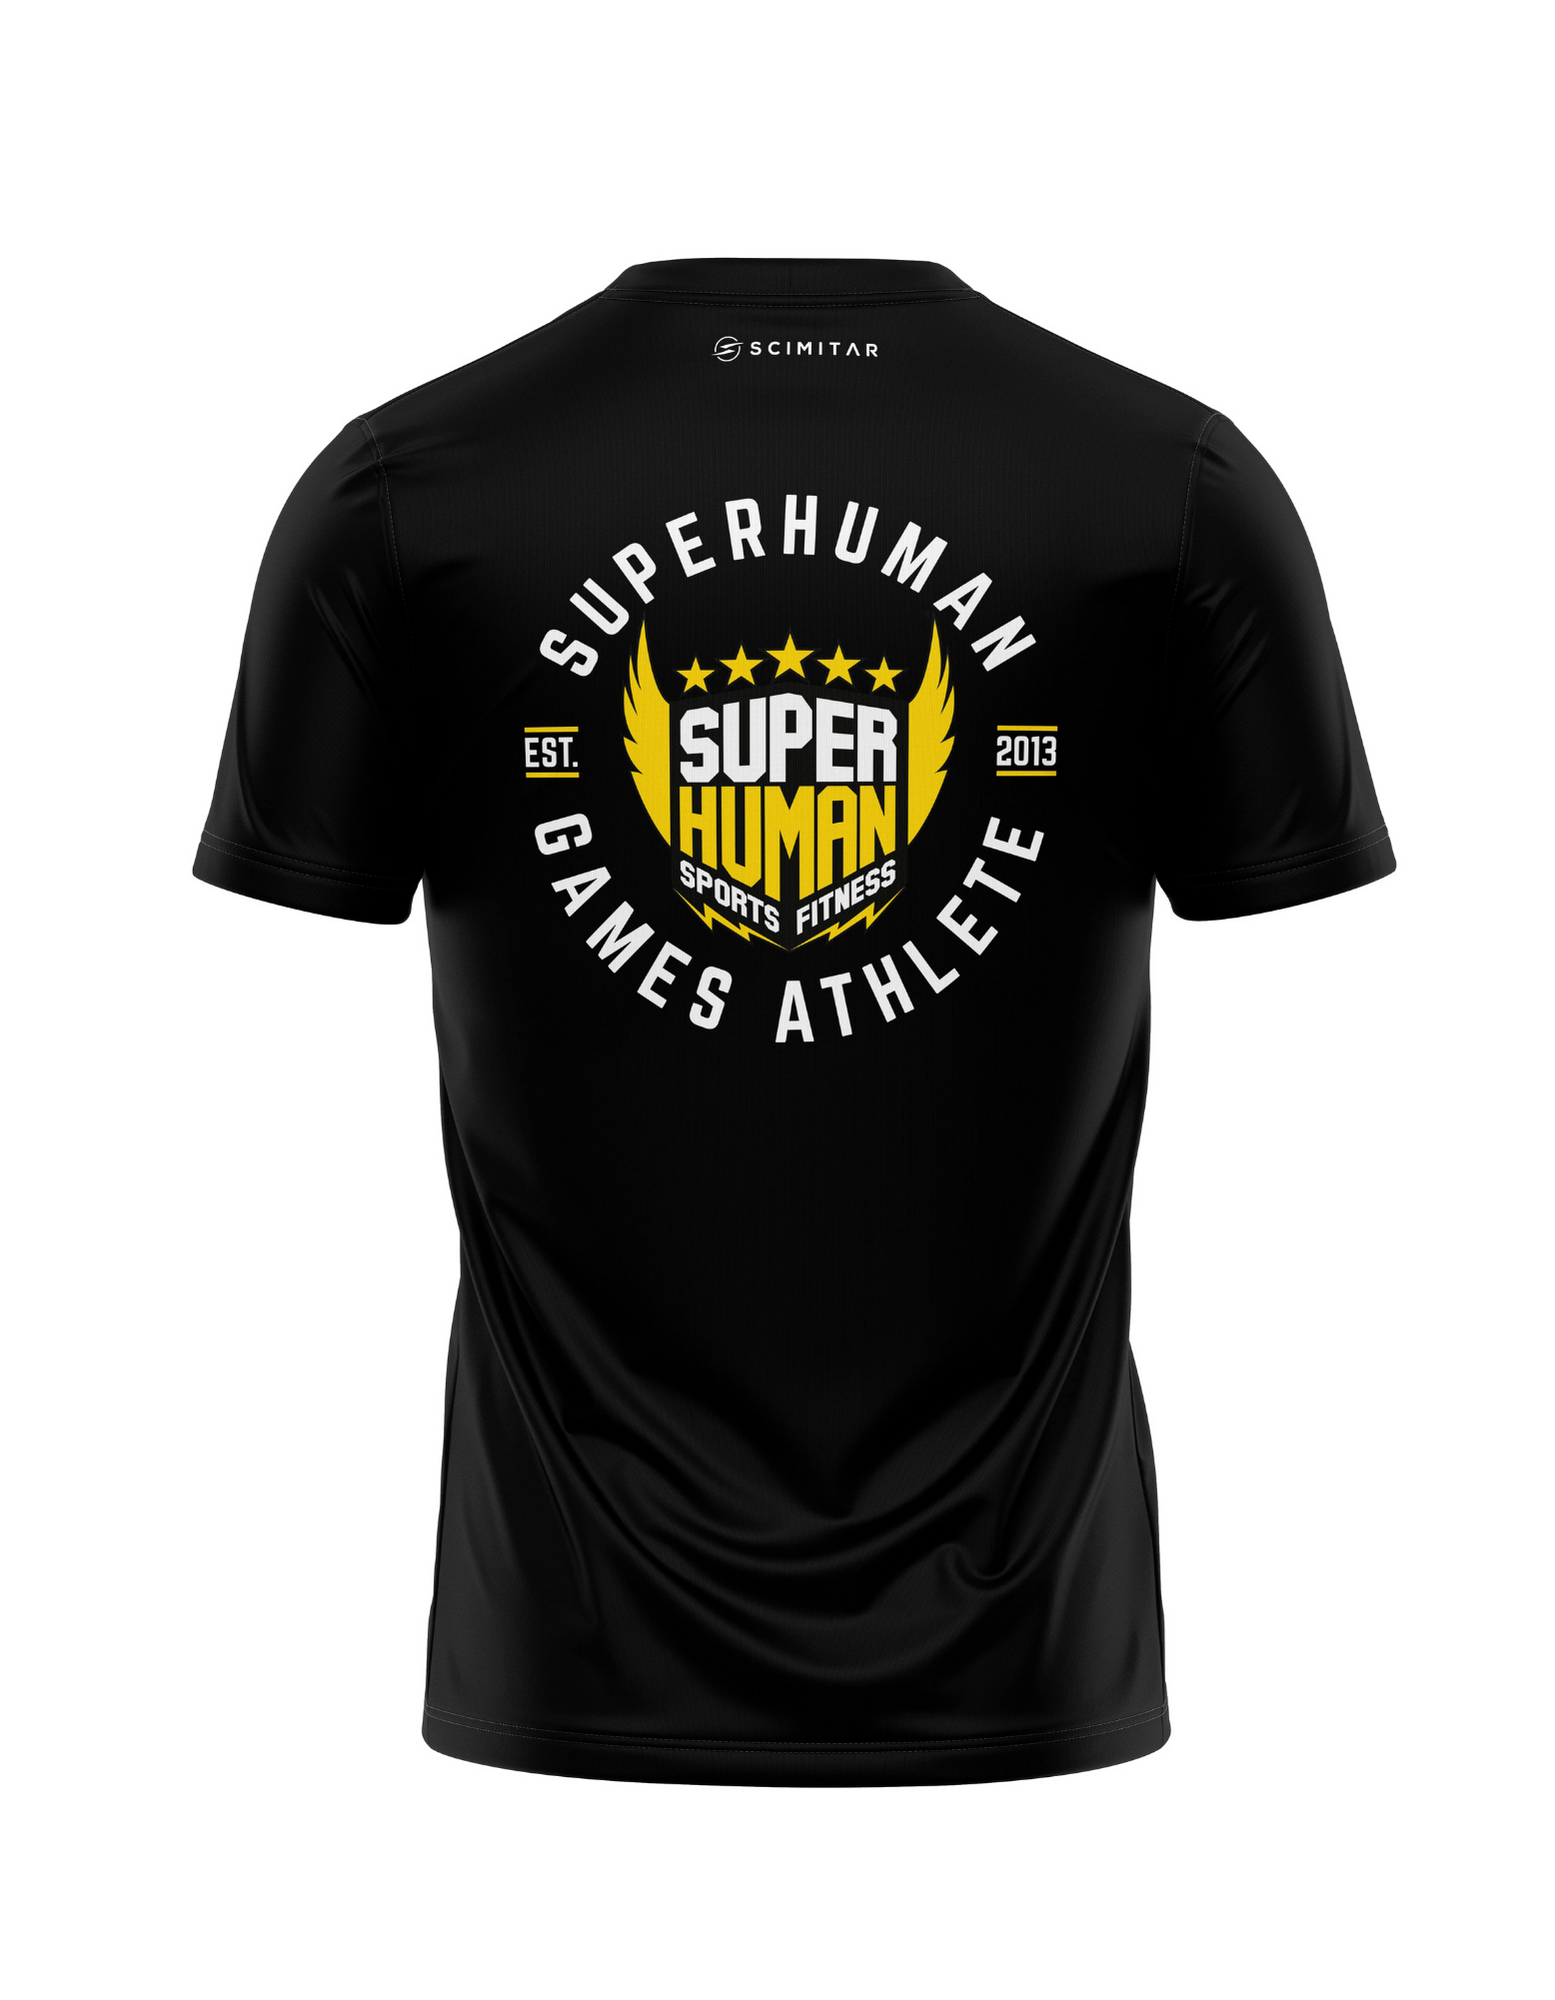 Official Games Athlete T-Shirt (Black or Grey)